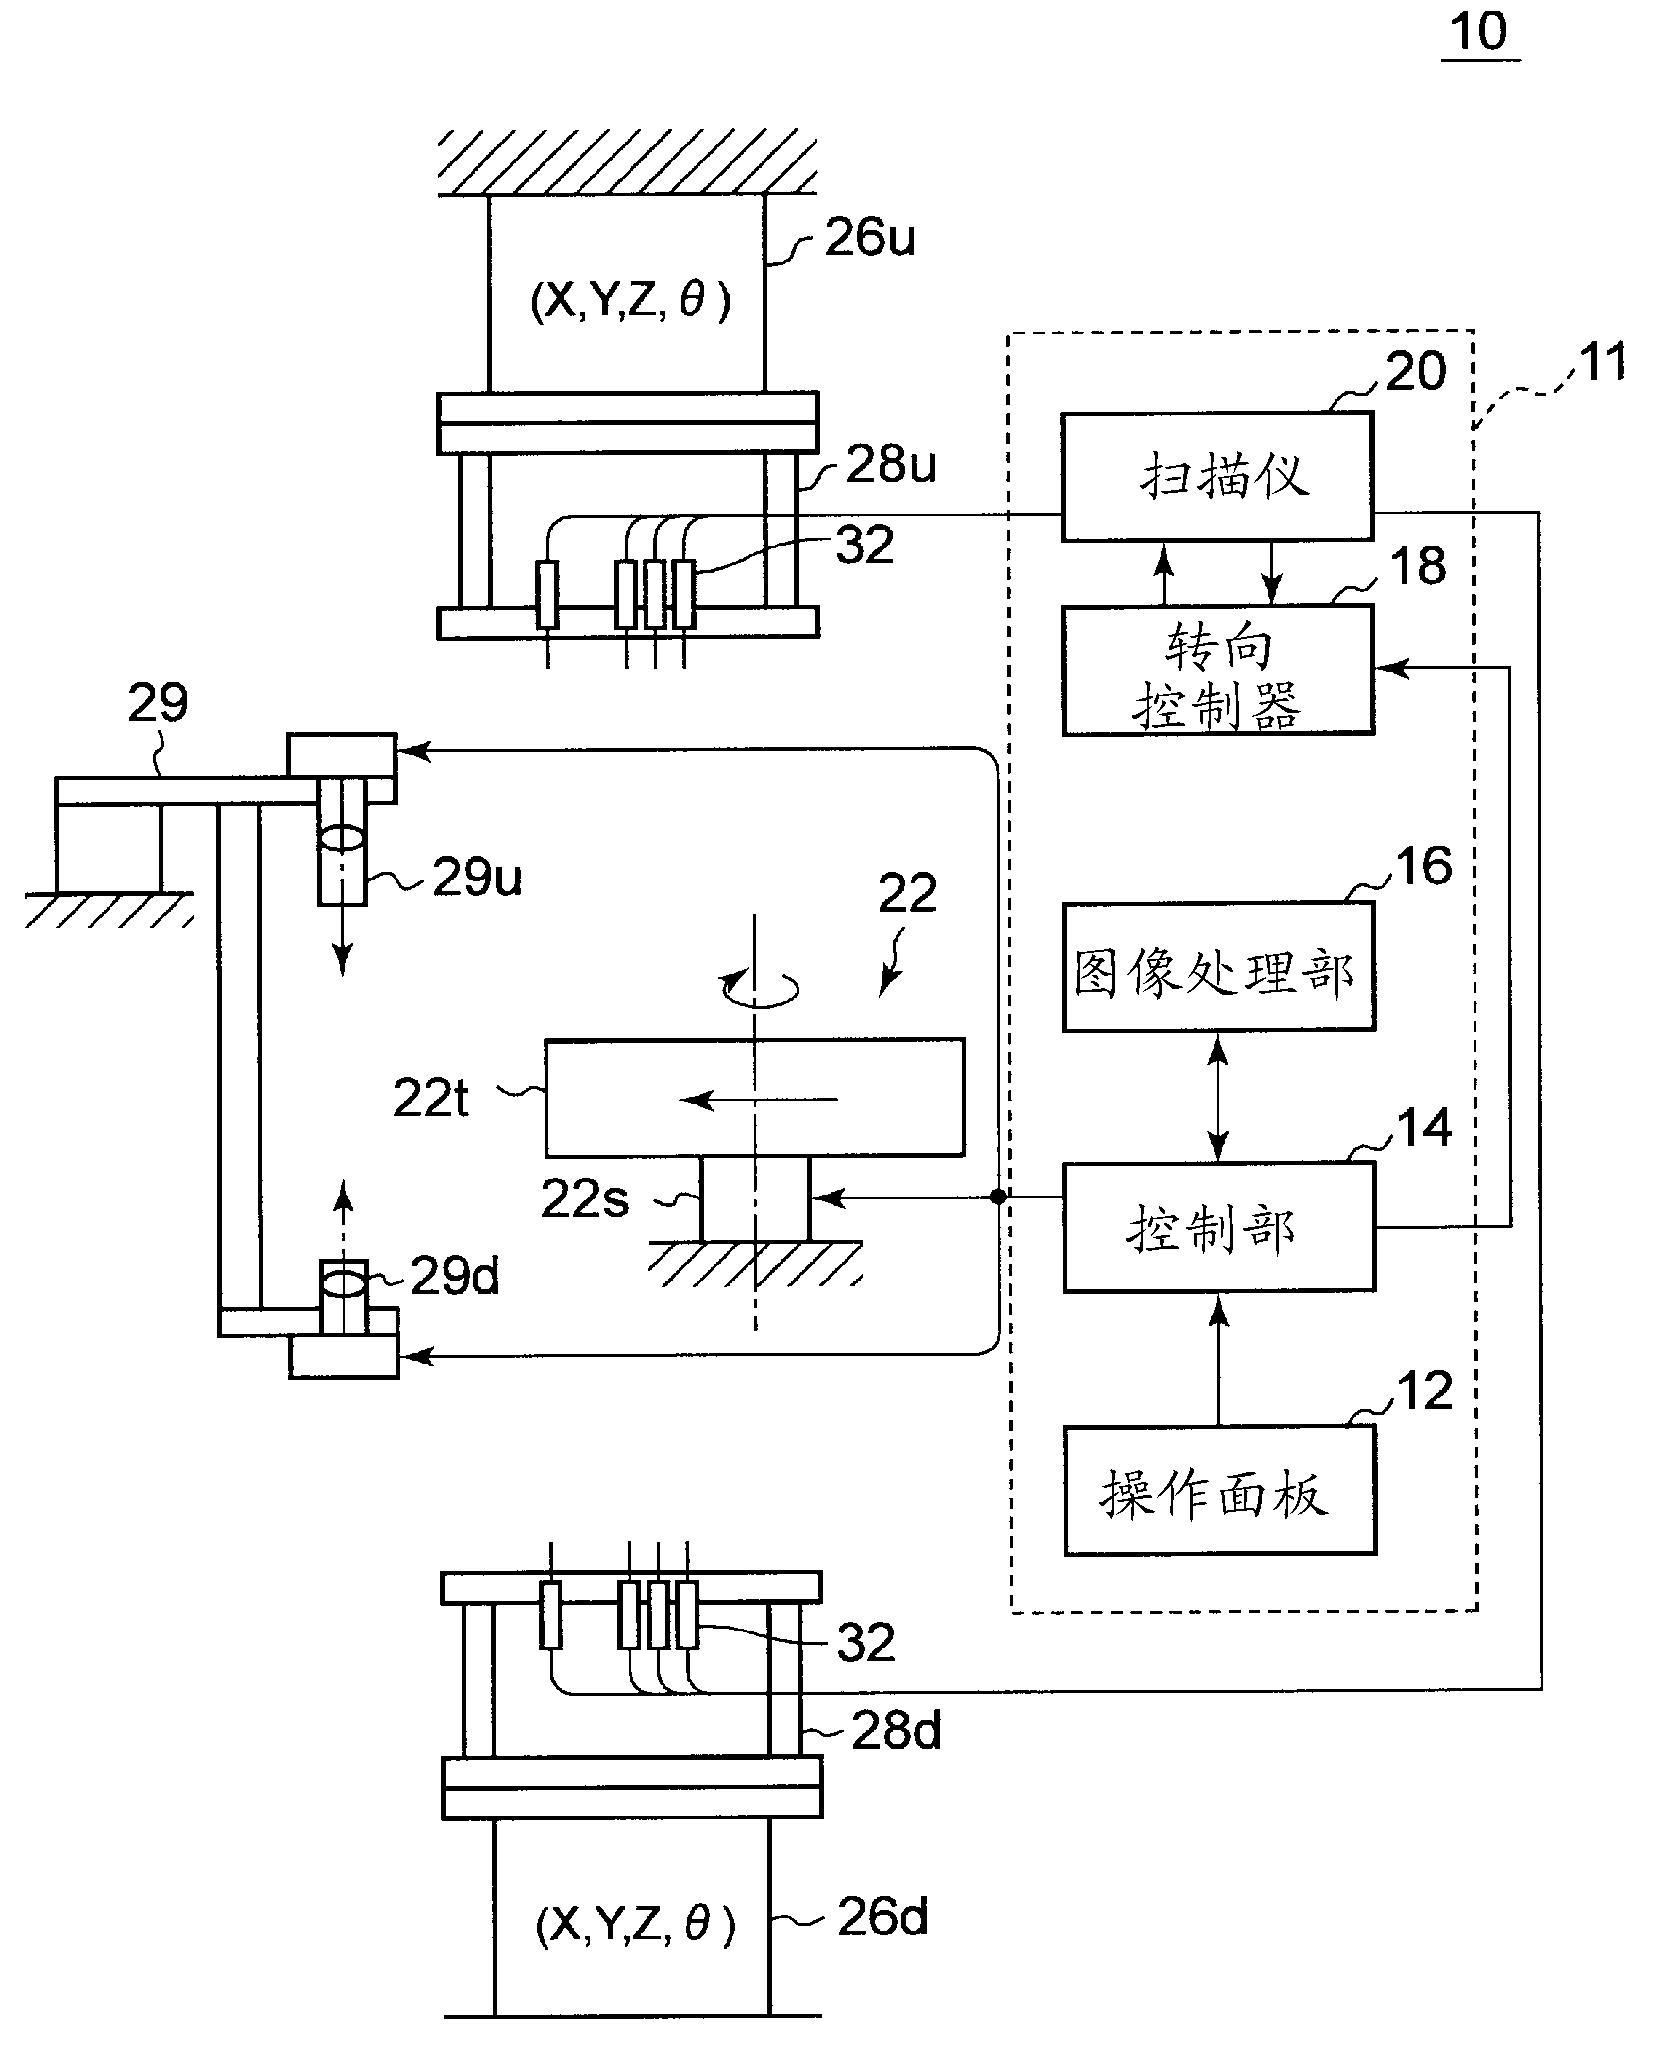 Substrate-inspecting device having cleaning mechanism for tips of pins